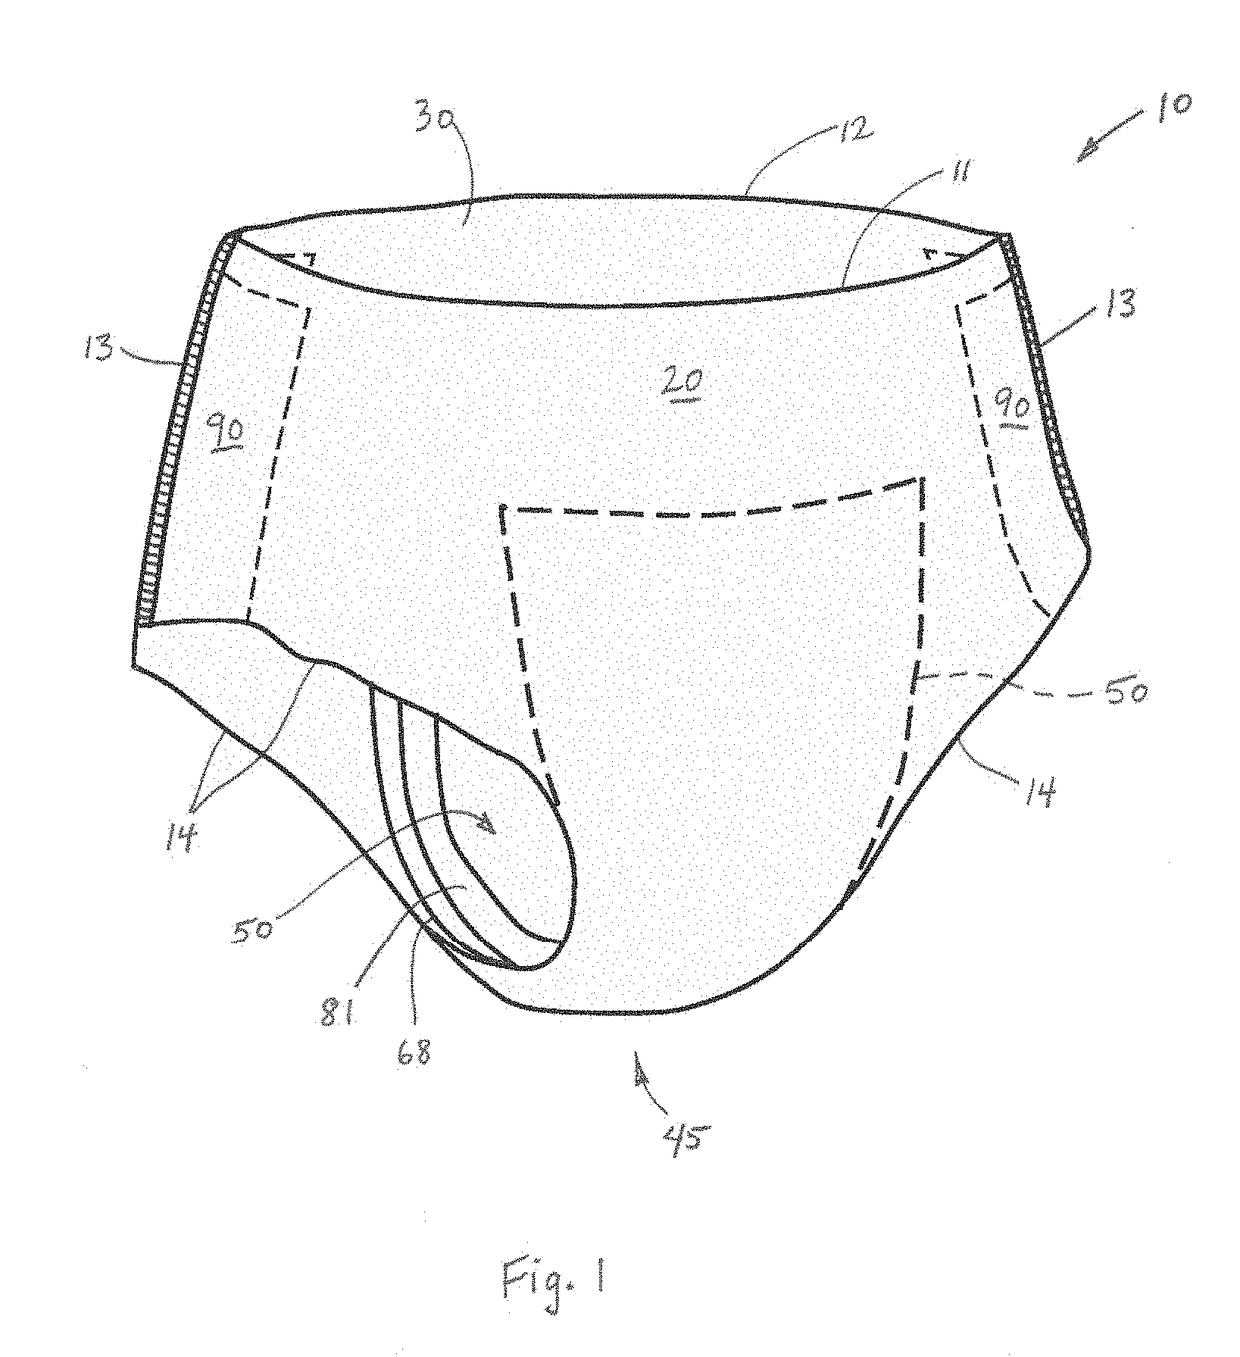 Incontinence pant with low-profile unelasticized zones